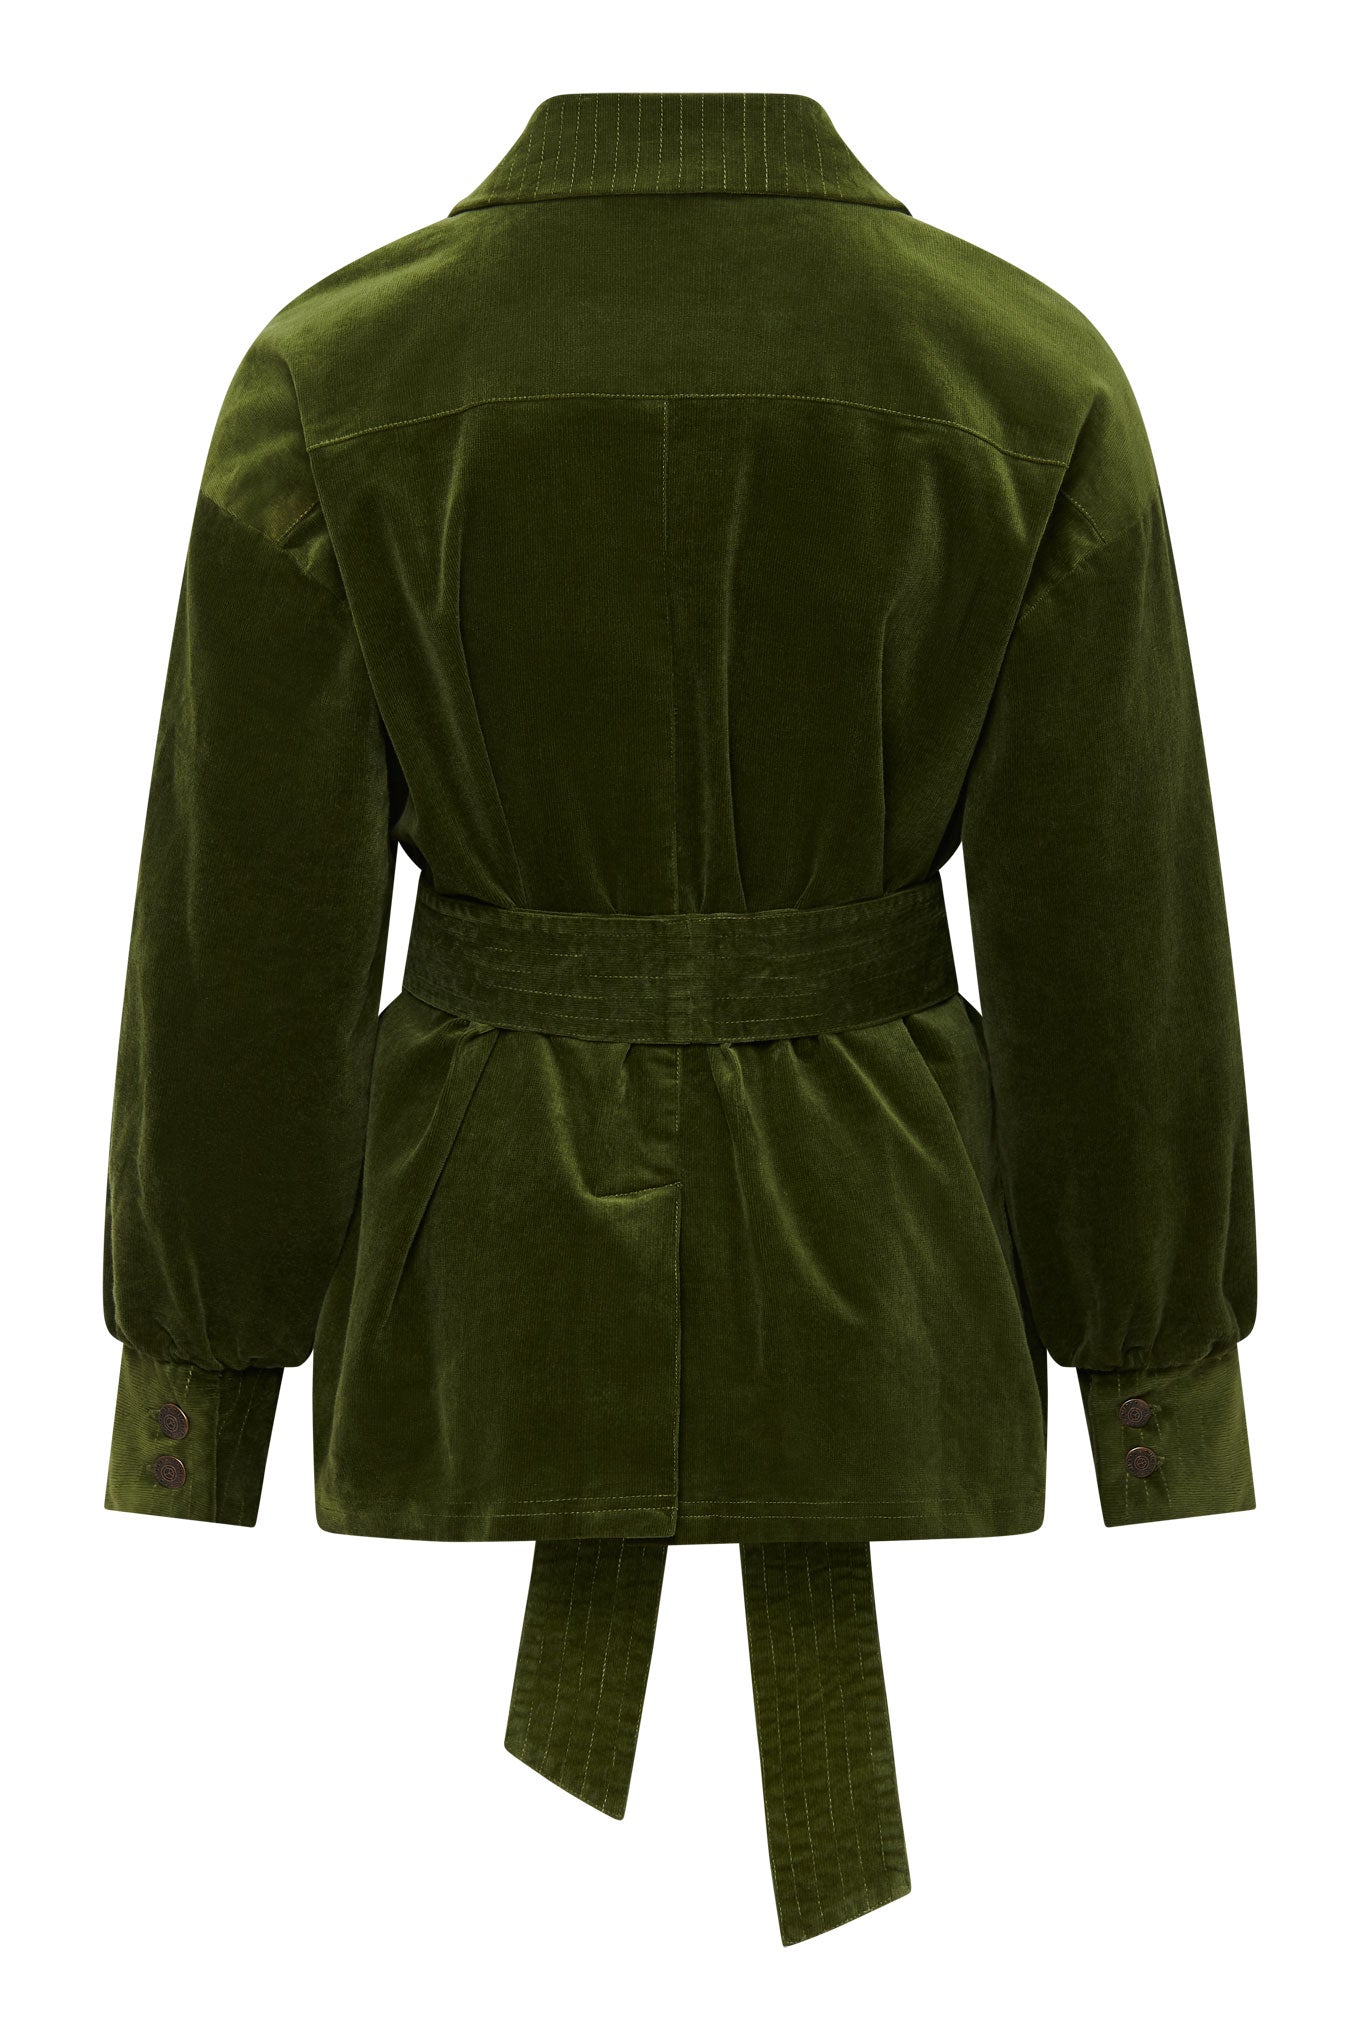 Green corduroy jacket APPOLINO made from 100% organic cotton from Komodo 